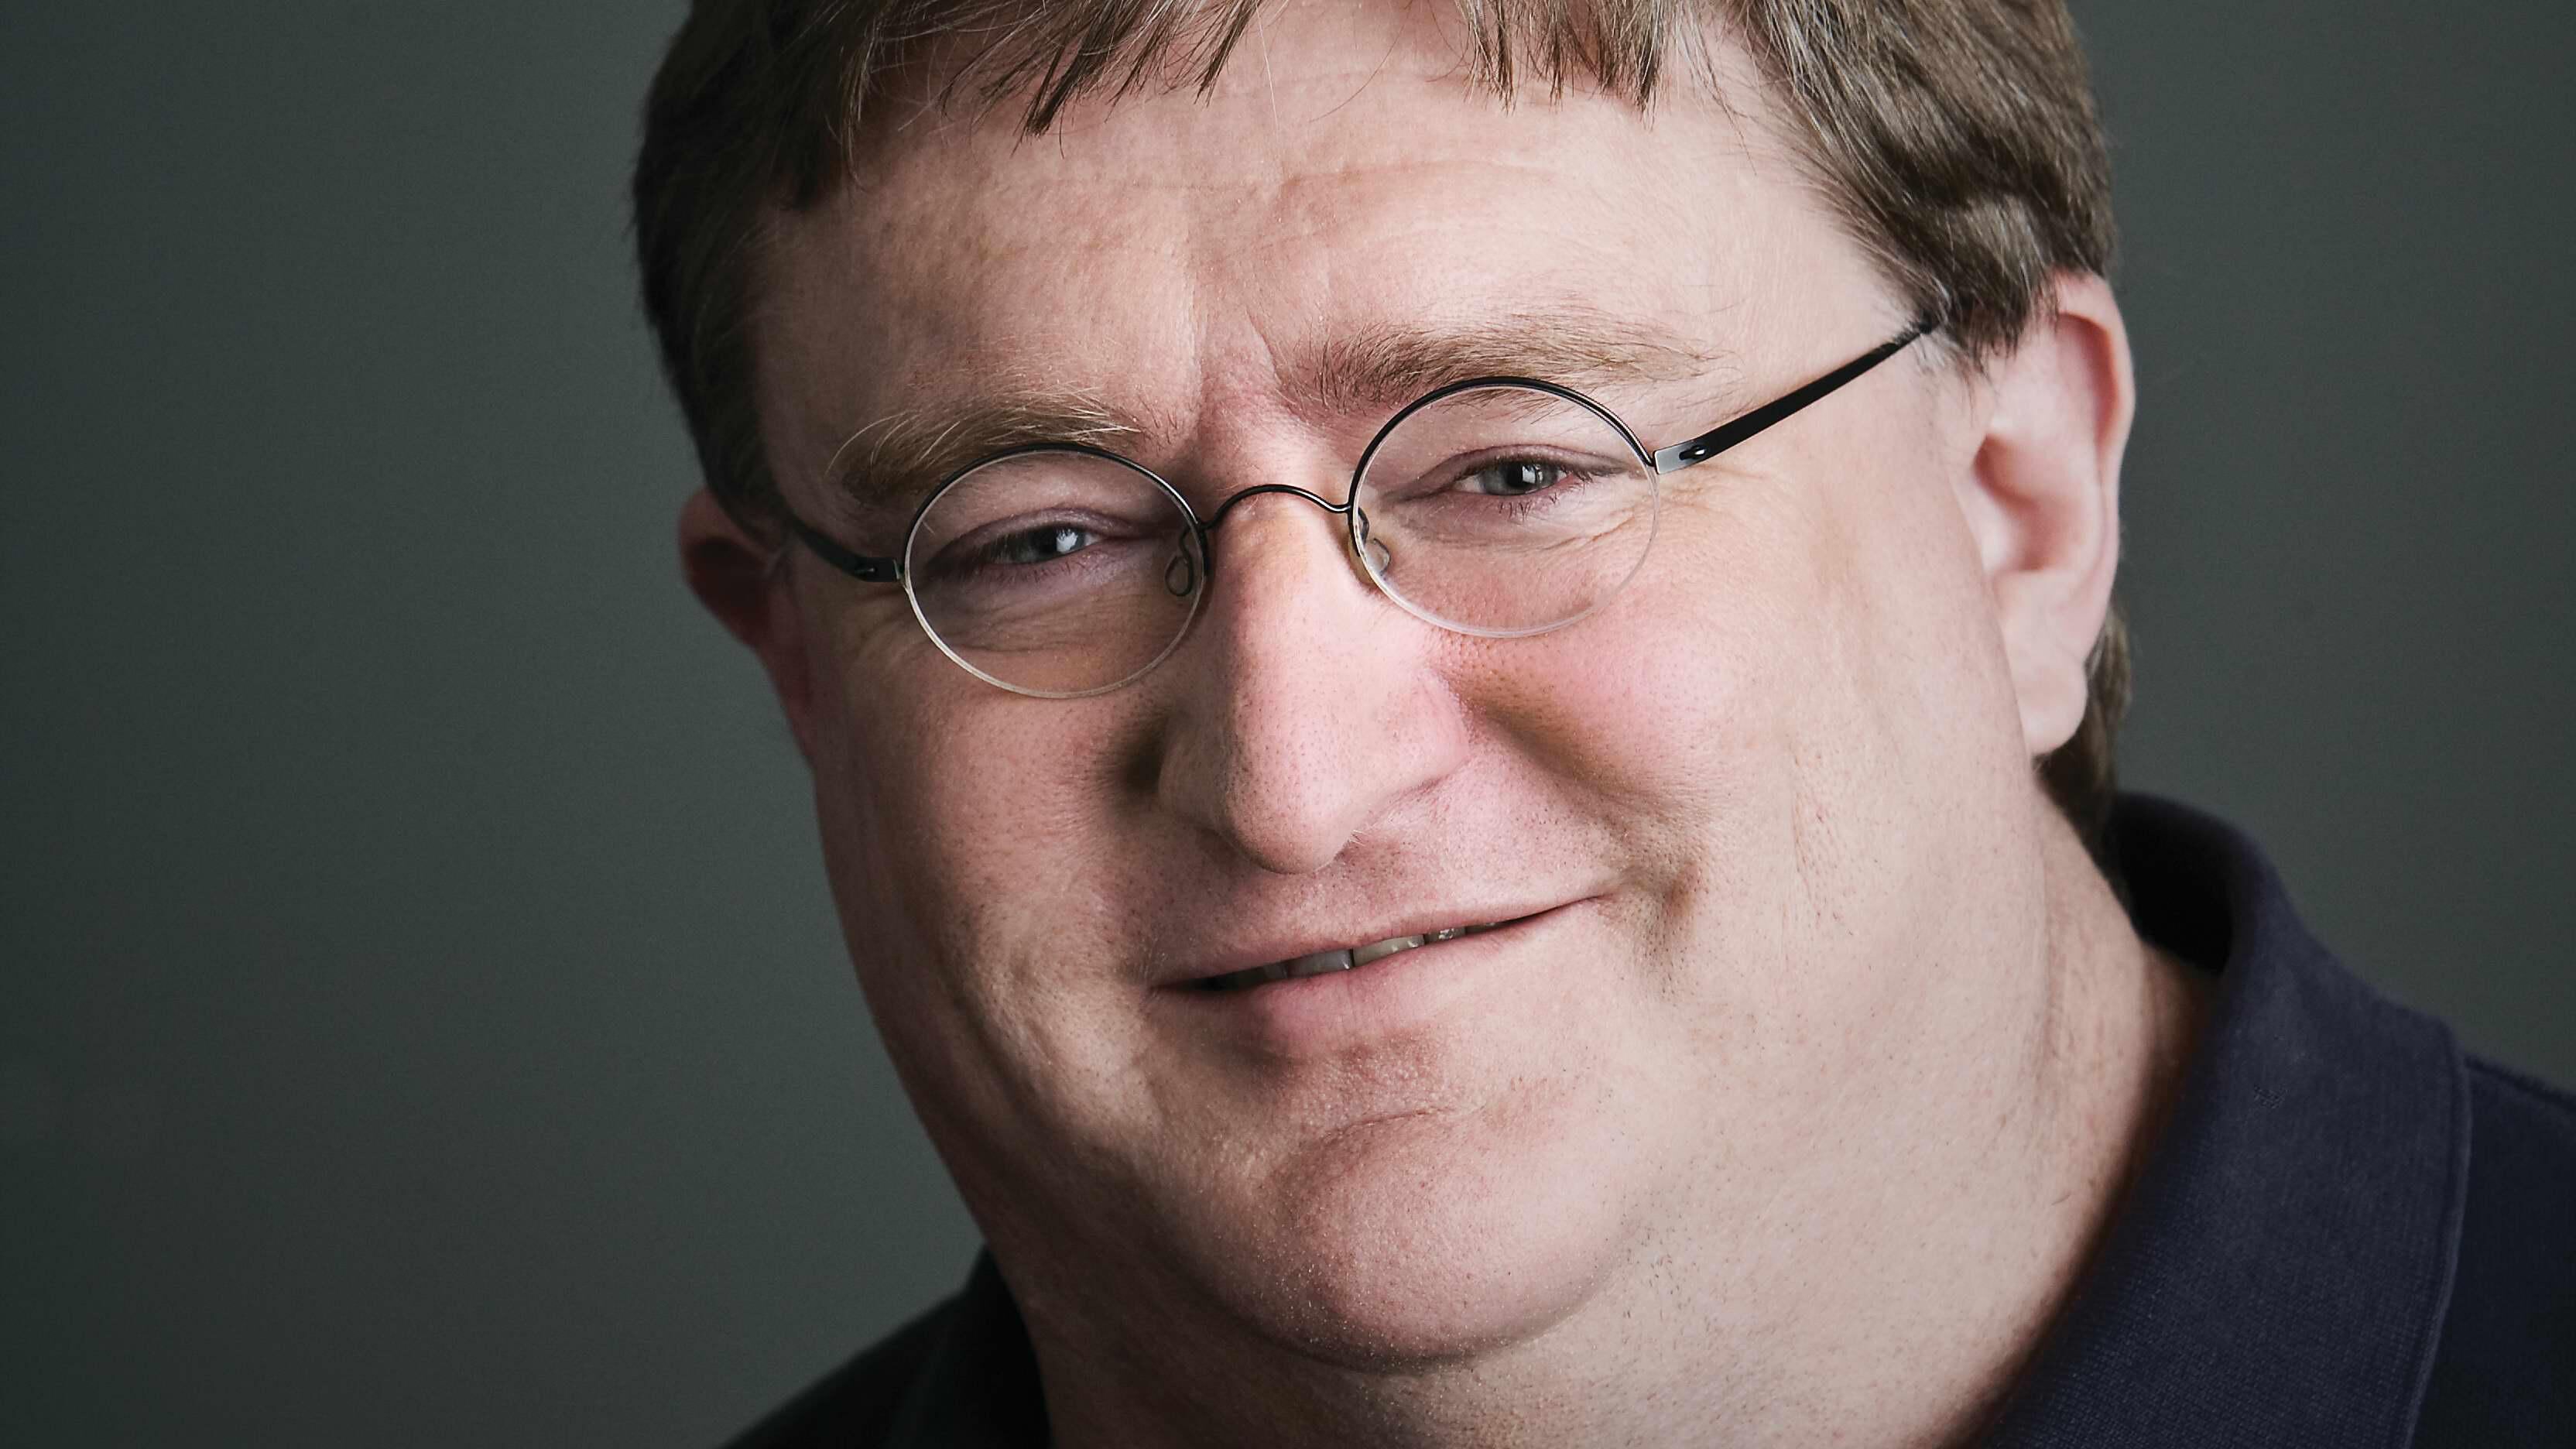 Gabe Newell Responds to Paid Mods Furor - mxdwn Games